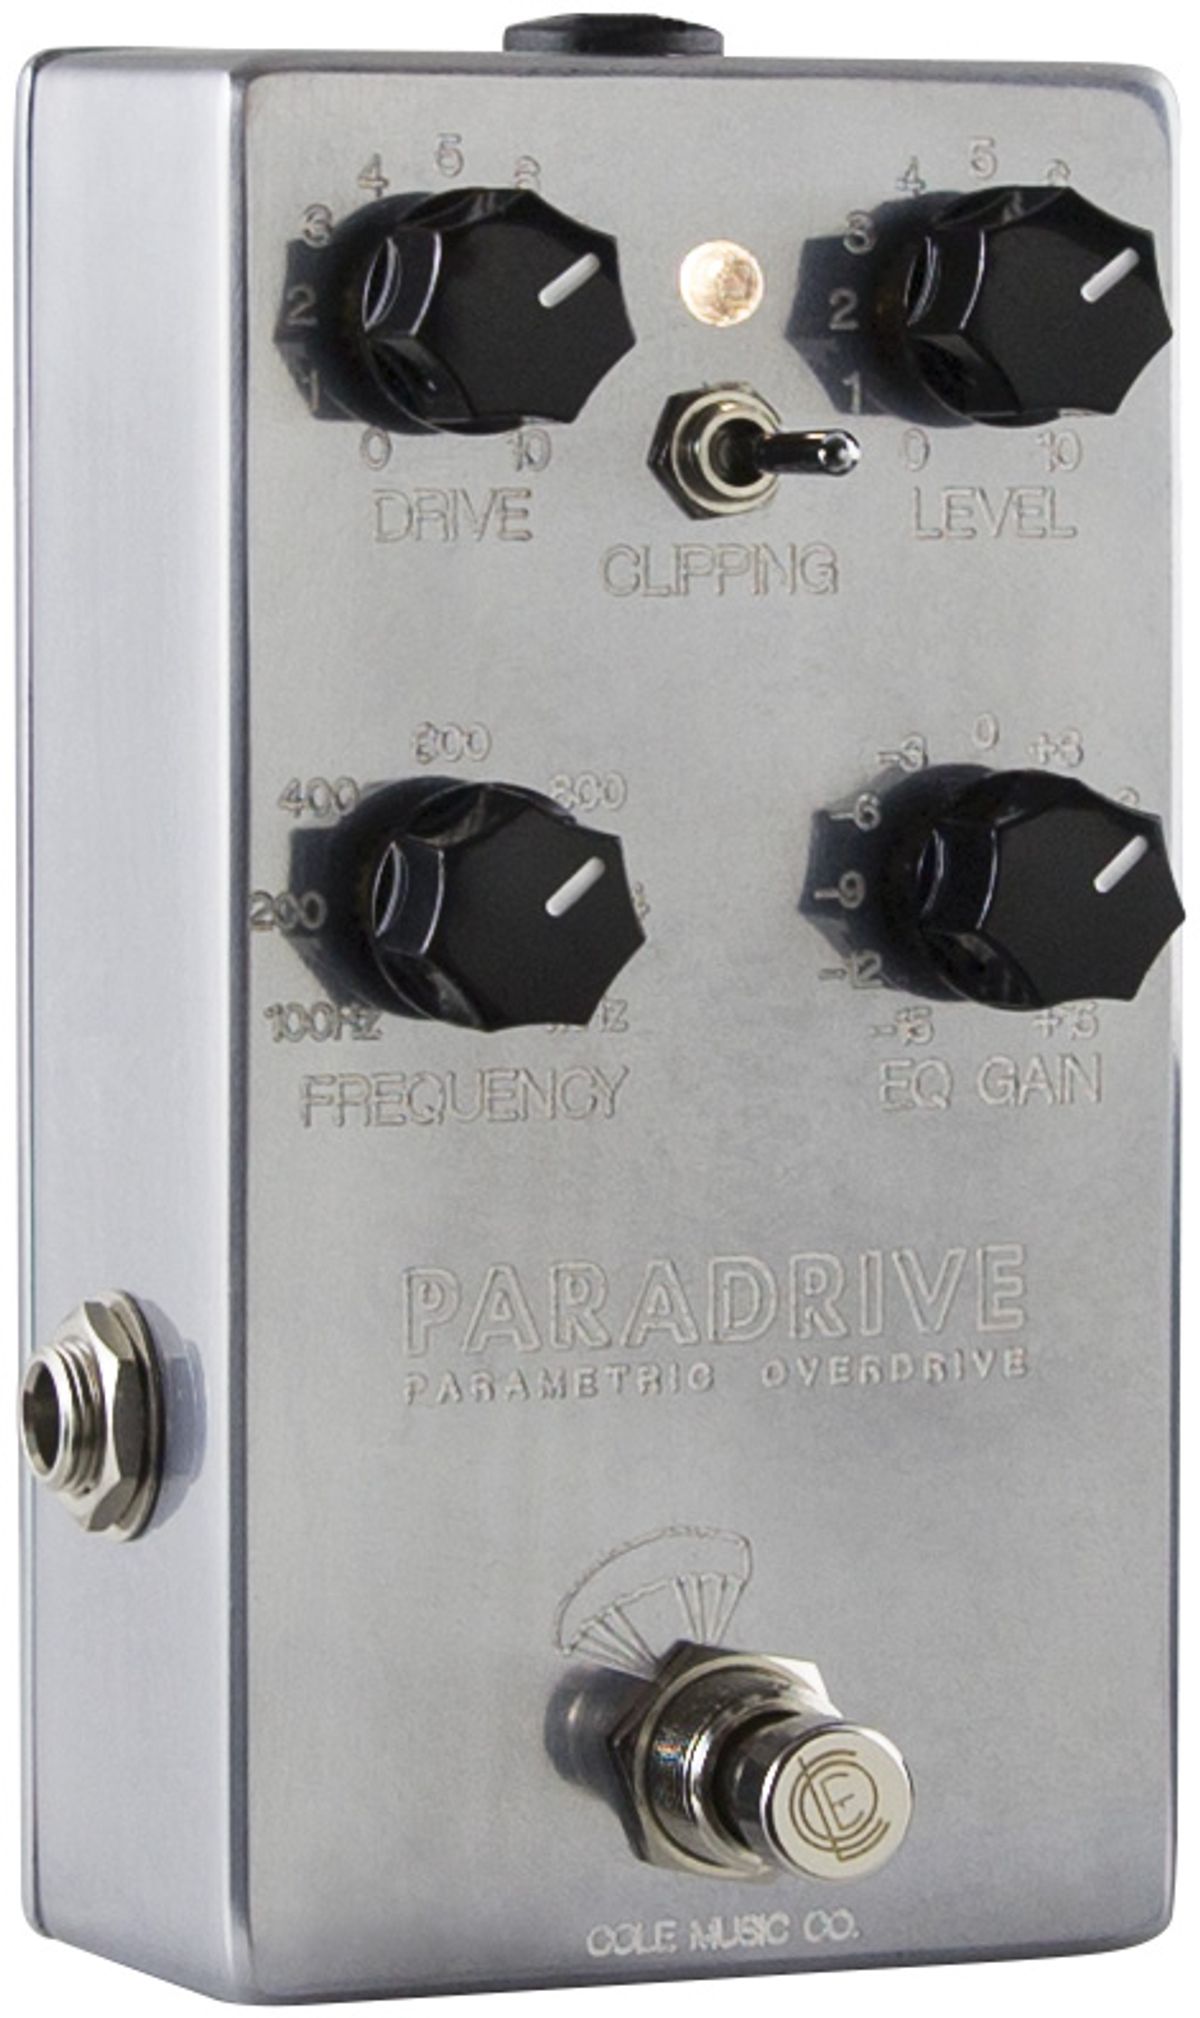 This Overdrive Has an Identity Crisis—In a Good Way